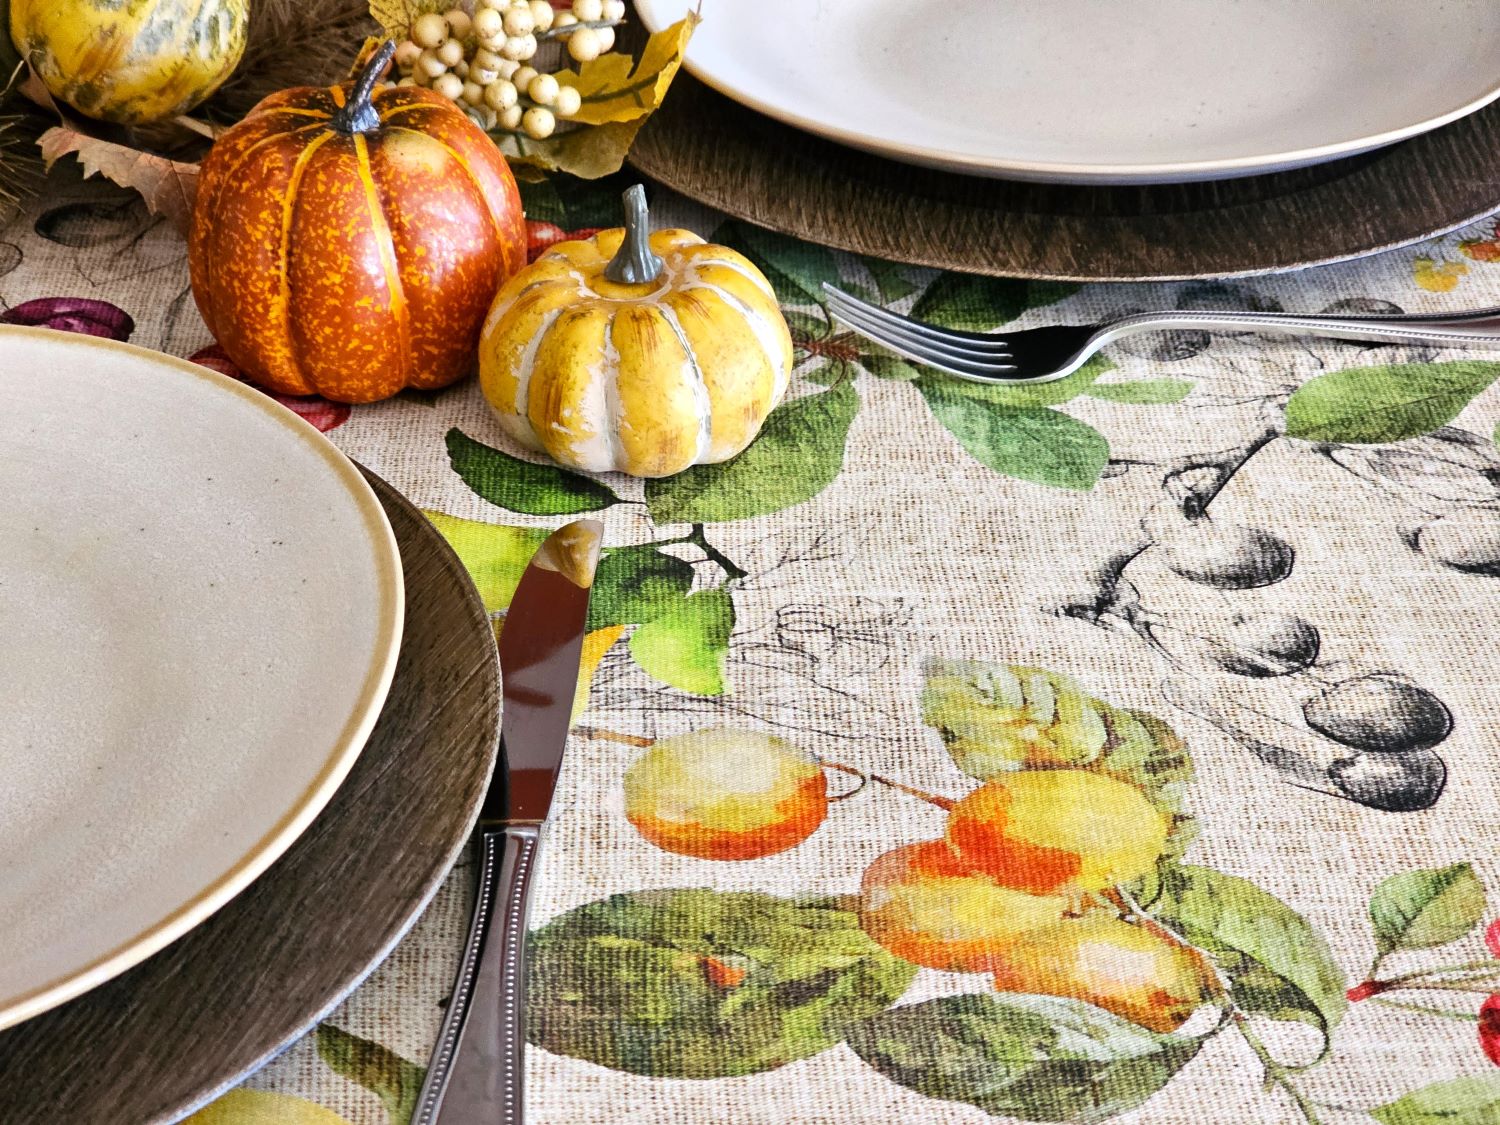 Autumn Leaves & Berries Paper Tablecloth, (7.5' x 14.5')